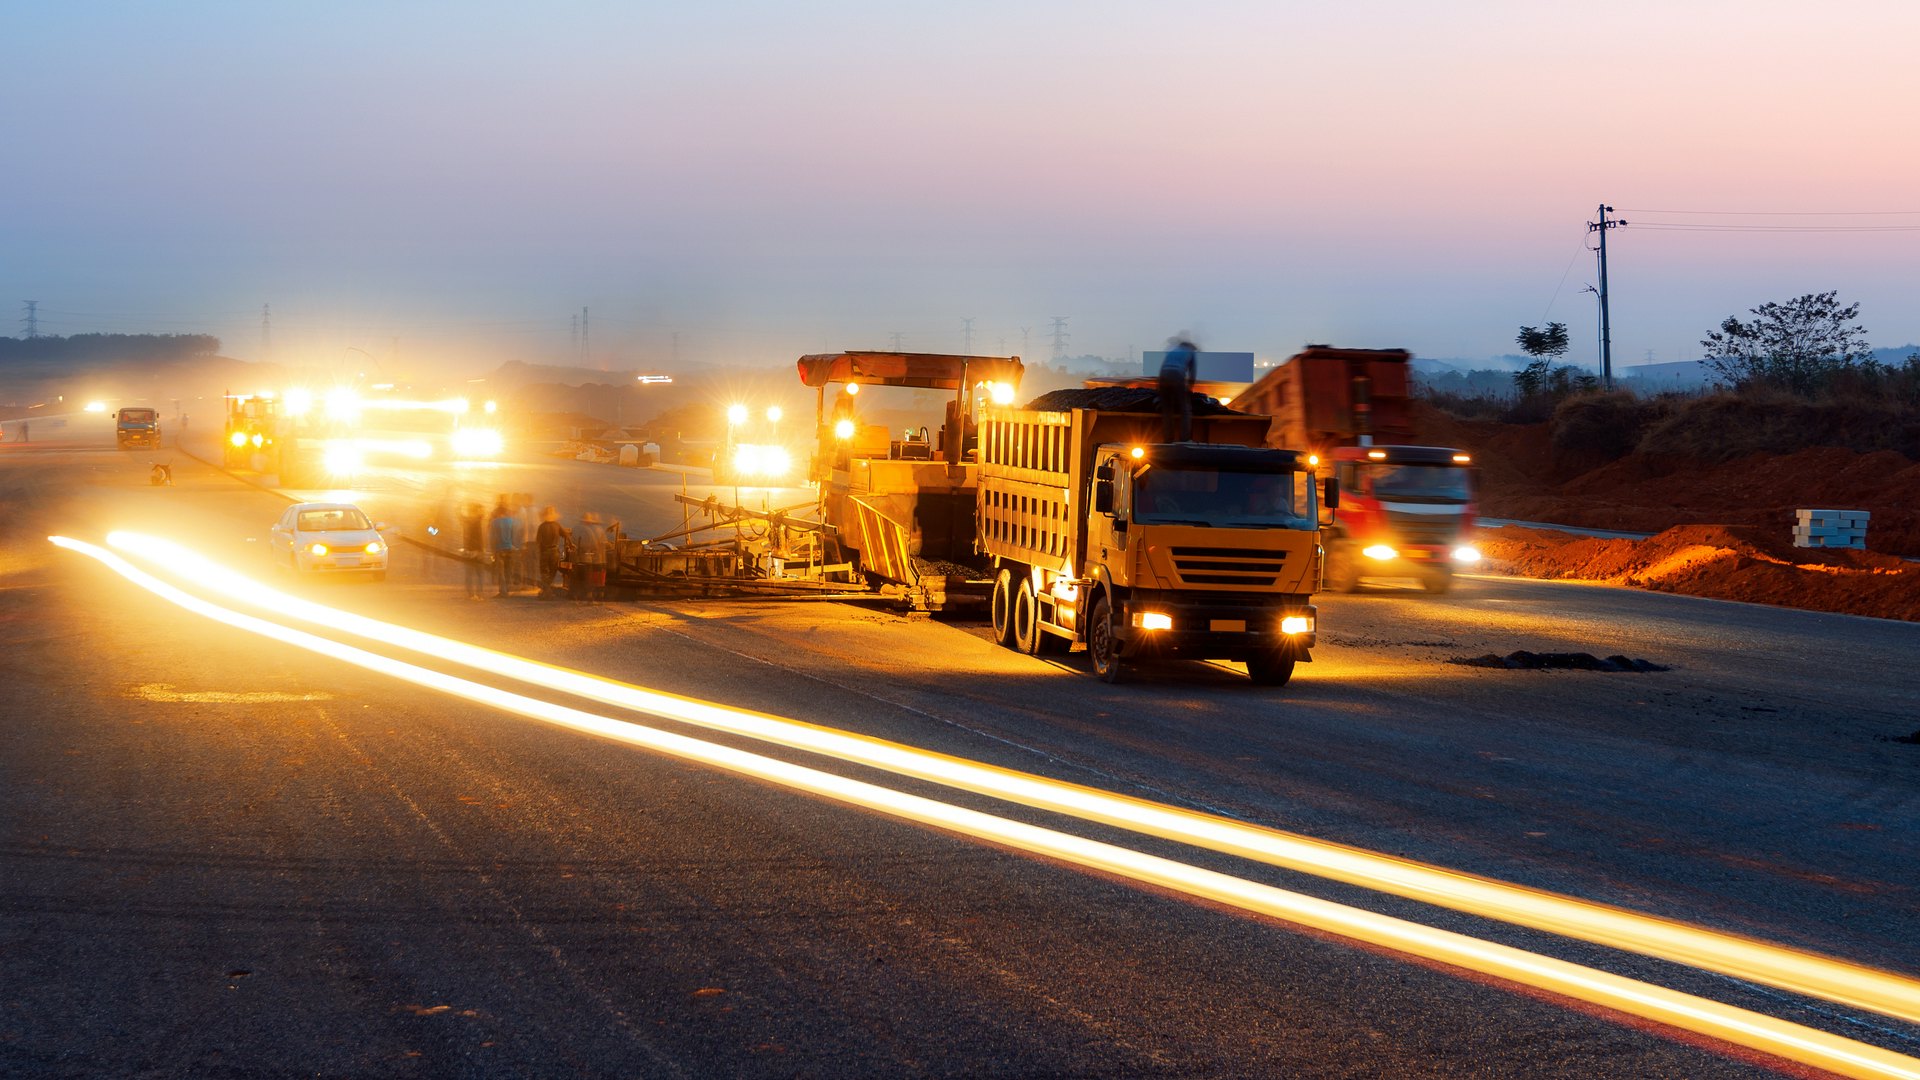 Night Time Work Zone Safety Guide